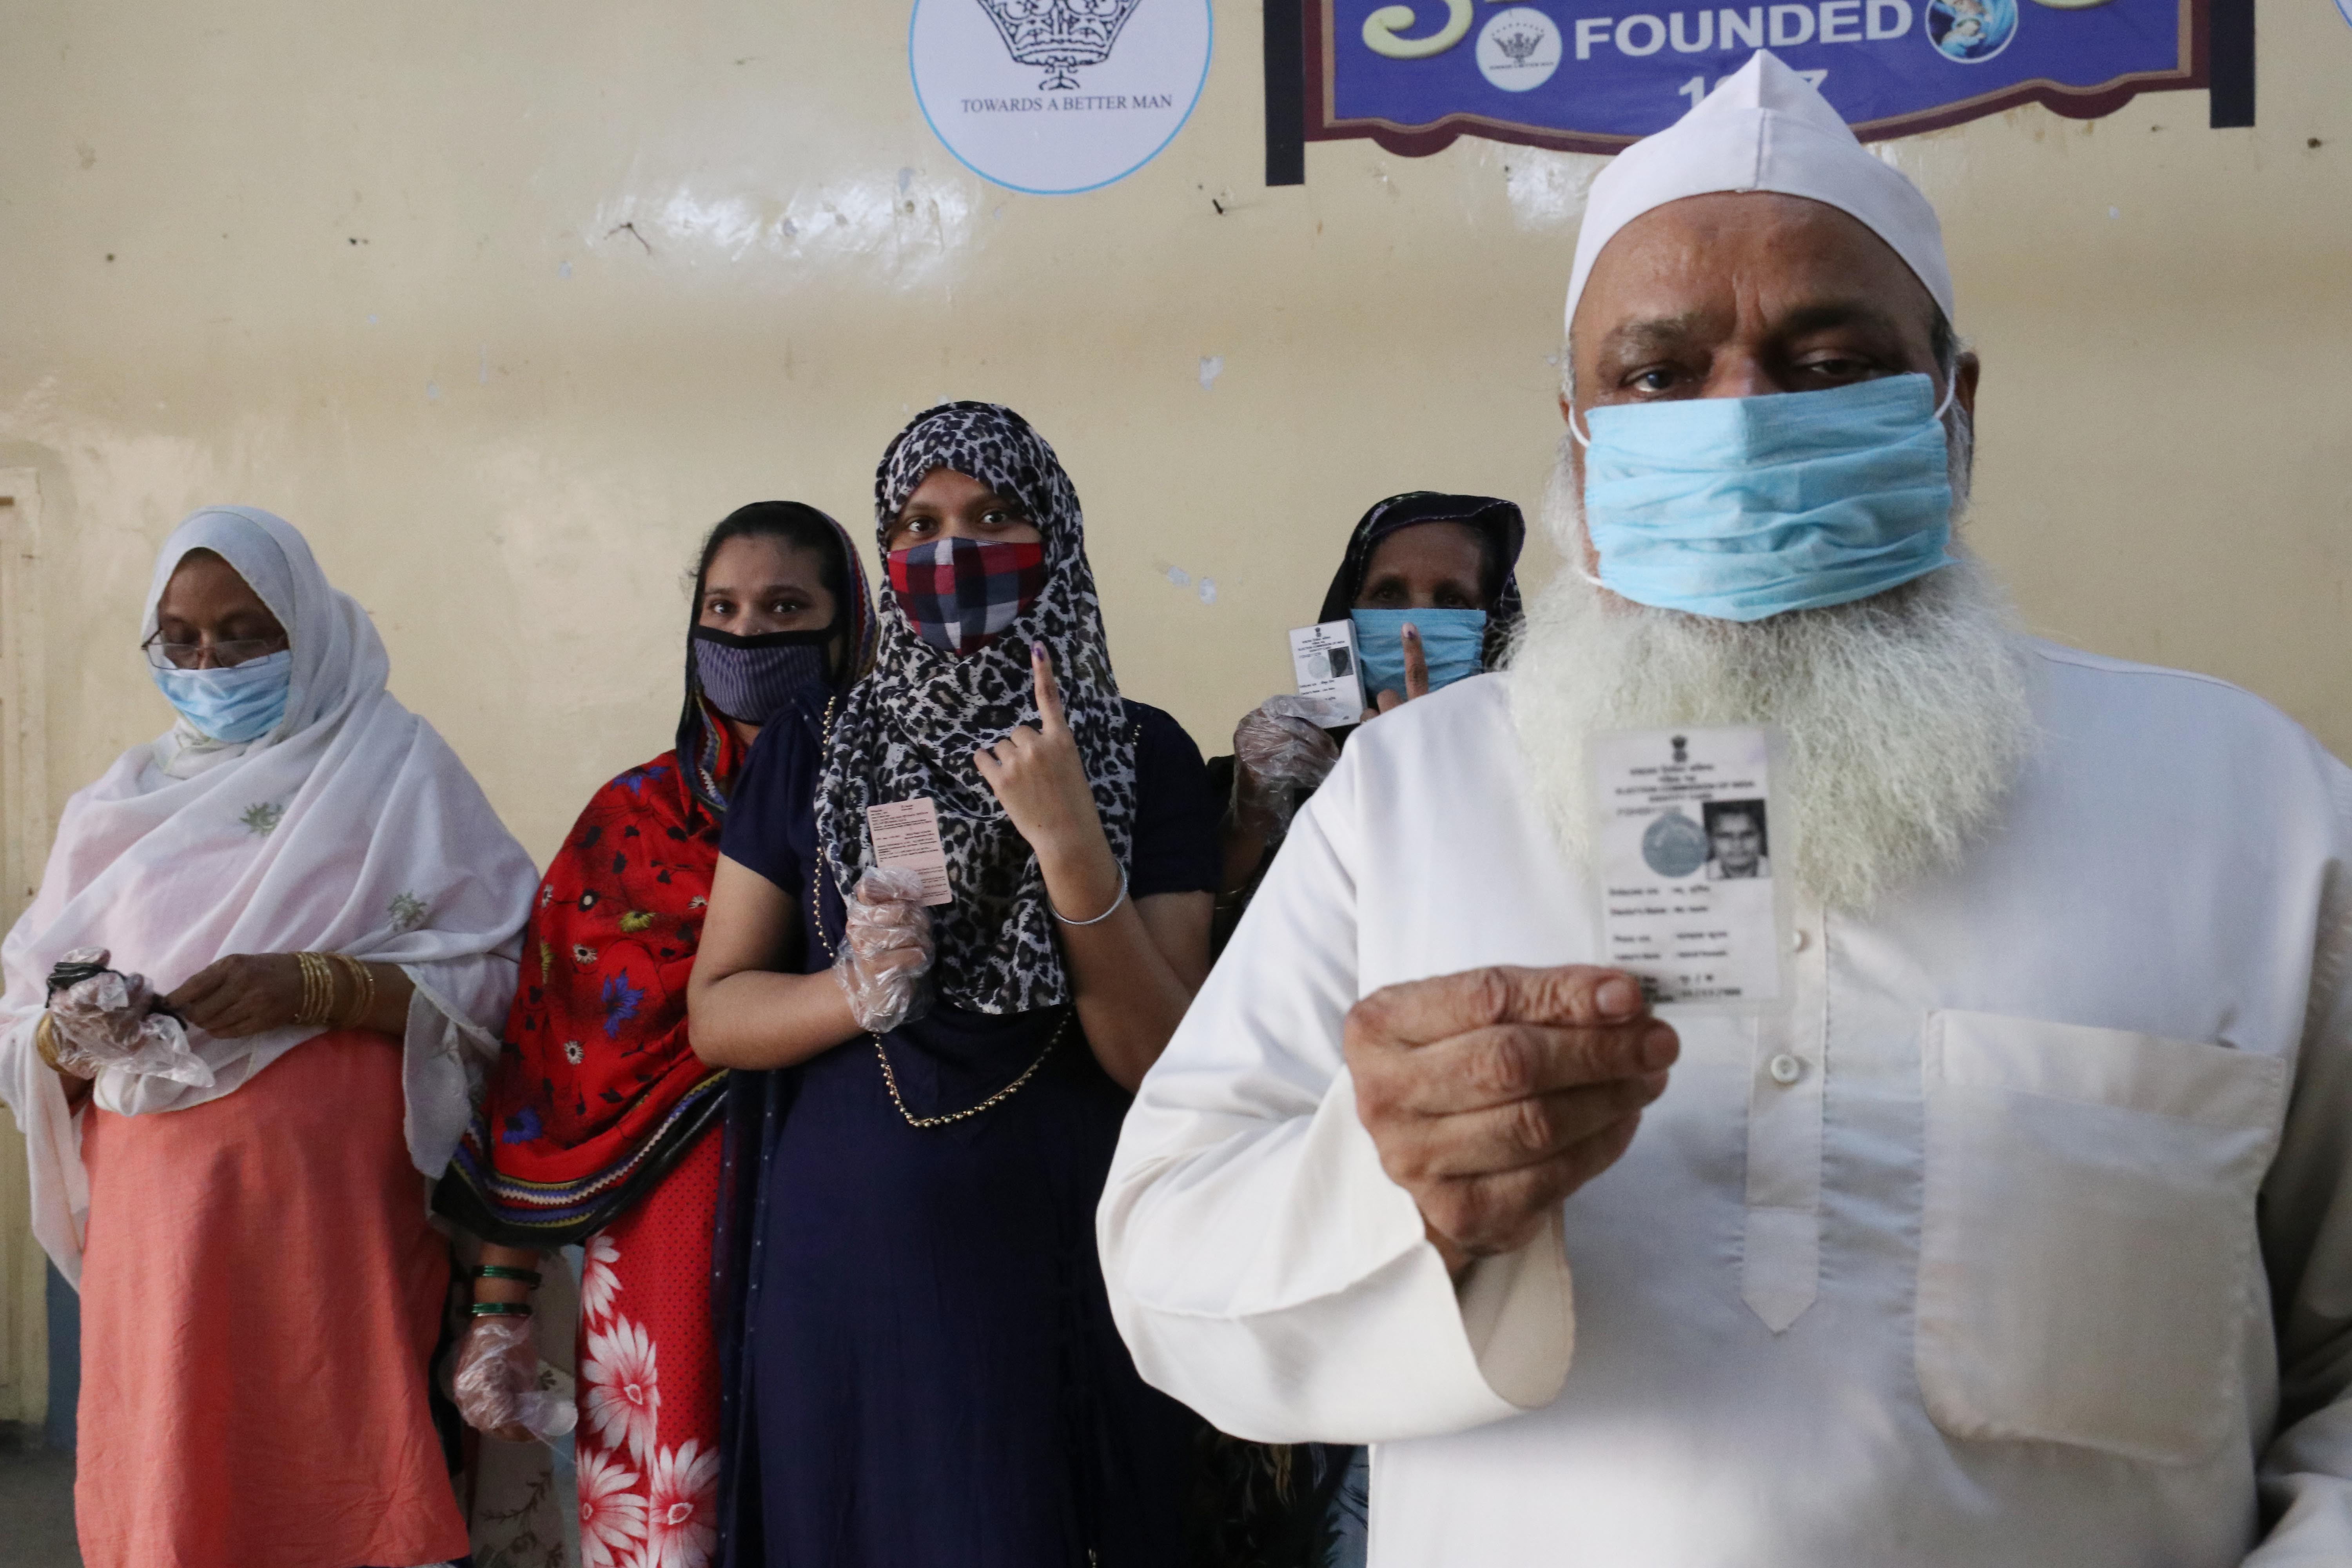 A Muslim family warring protective face mask and showing voter id card wait outside a polling station to cast their vote  during  8th phase of West Bengal assembly elections in Kolkata, India on 29April, 2021. The 8th phase of West Bengal Assembly Electio (Foto: NurPhoto via Getty Images)